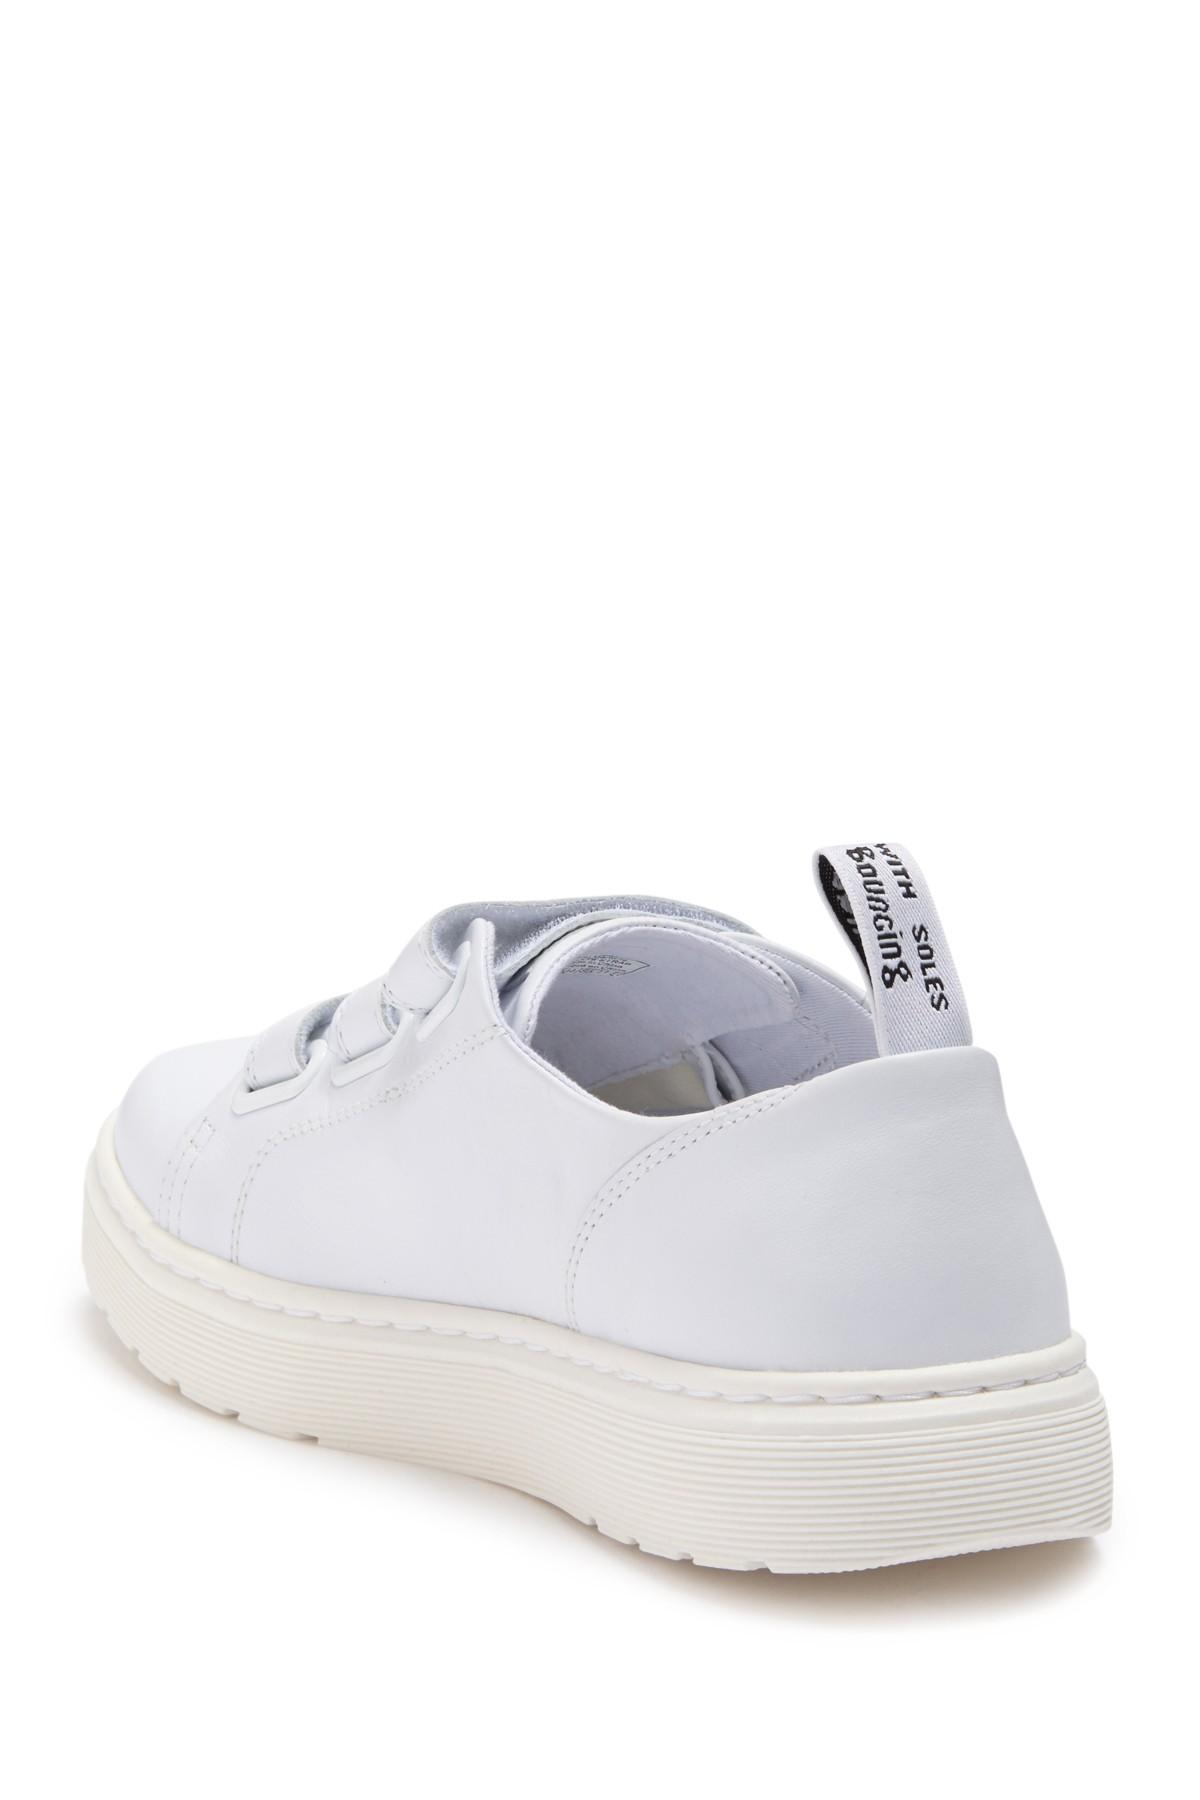 Dr. Martens Leather White Dante Strap Sneakers for Men | Lyst